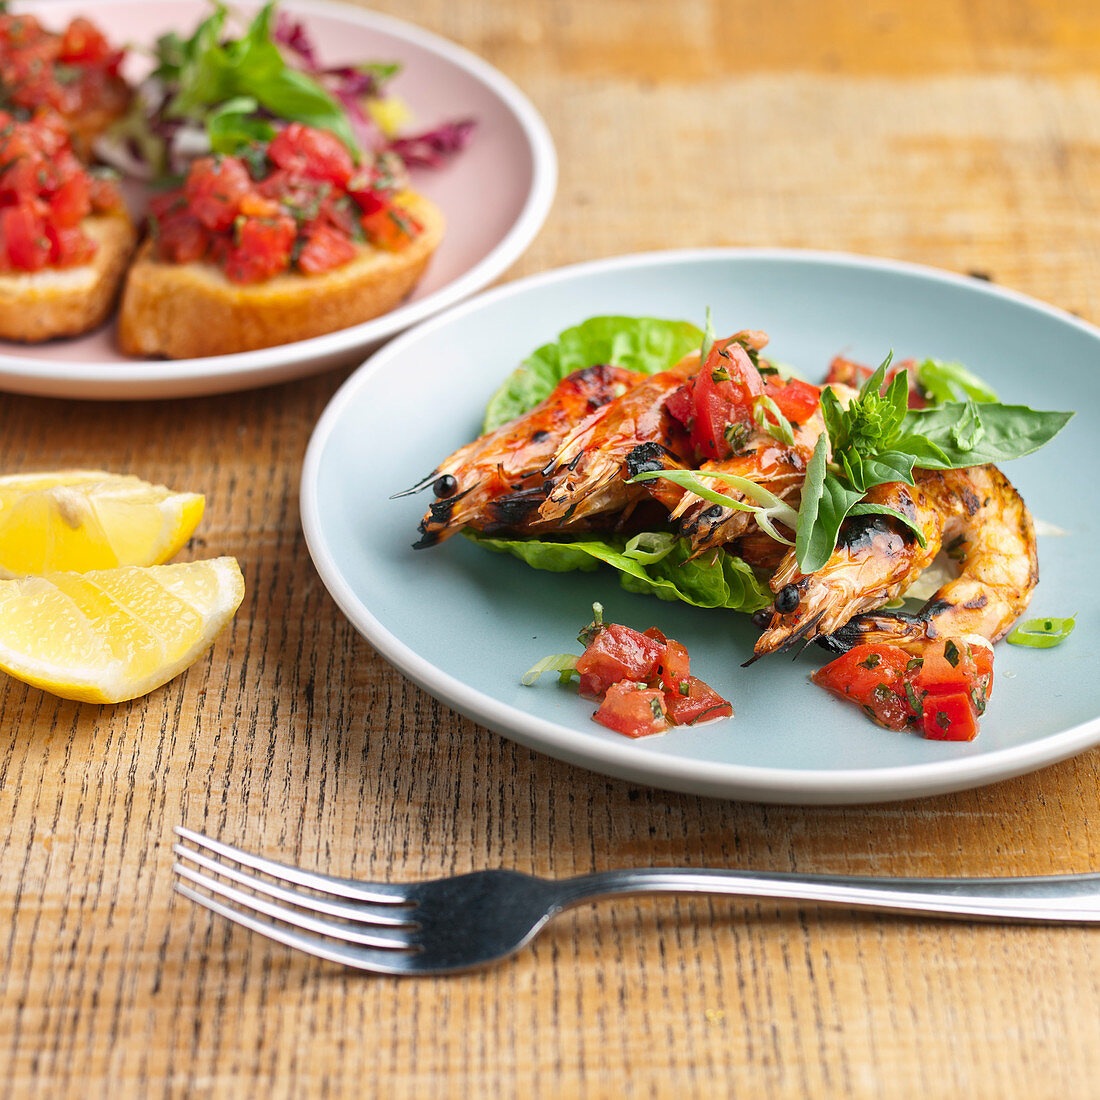 King prawn salad with lettuce and tomato salsa